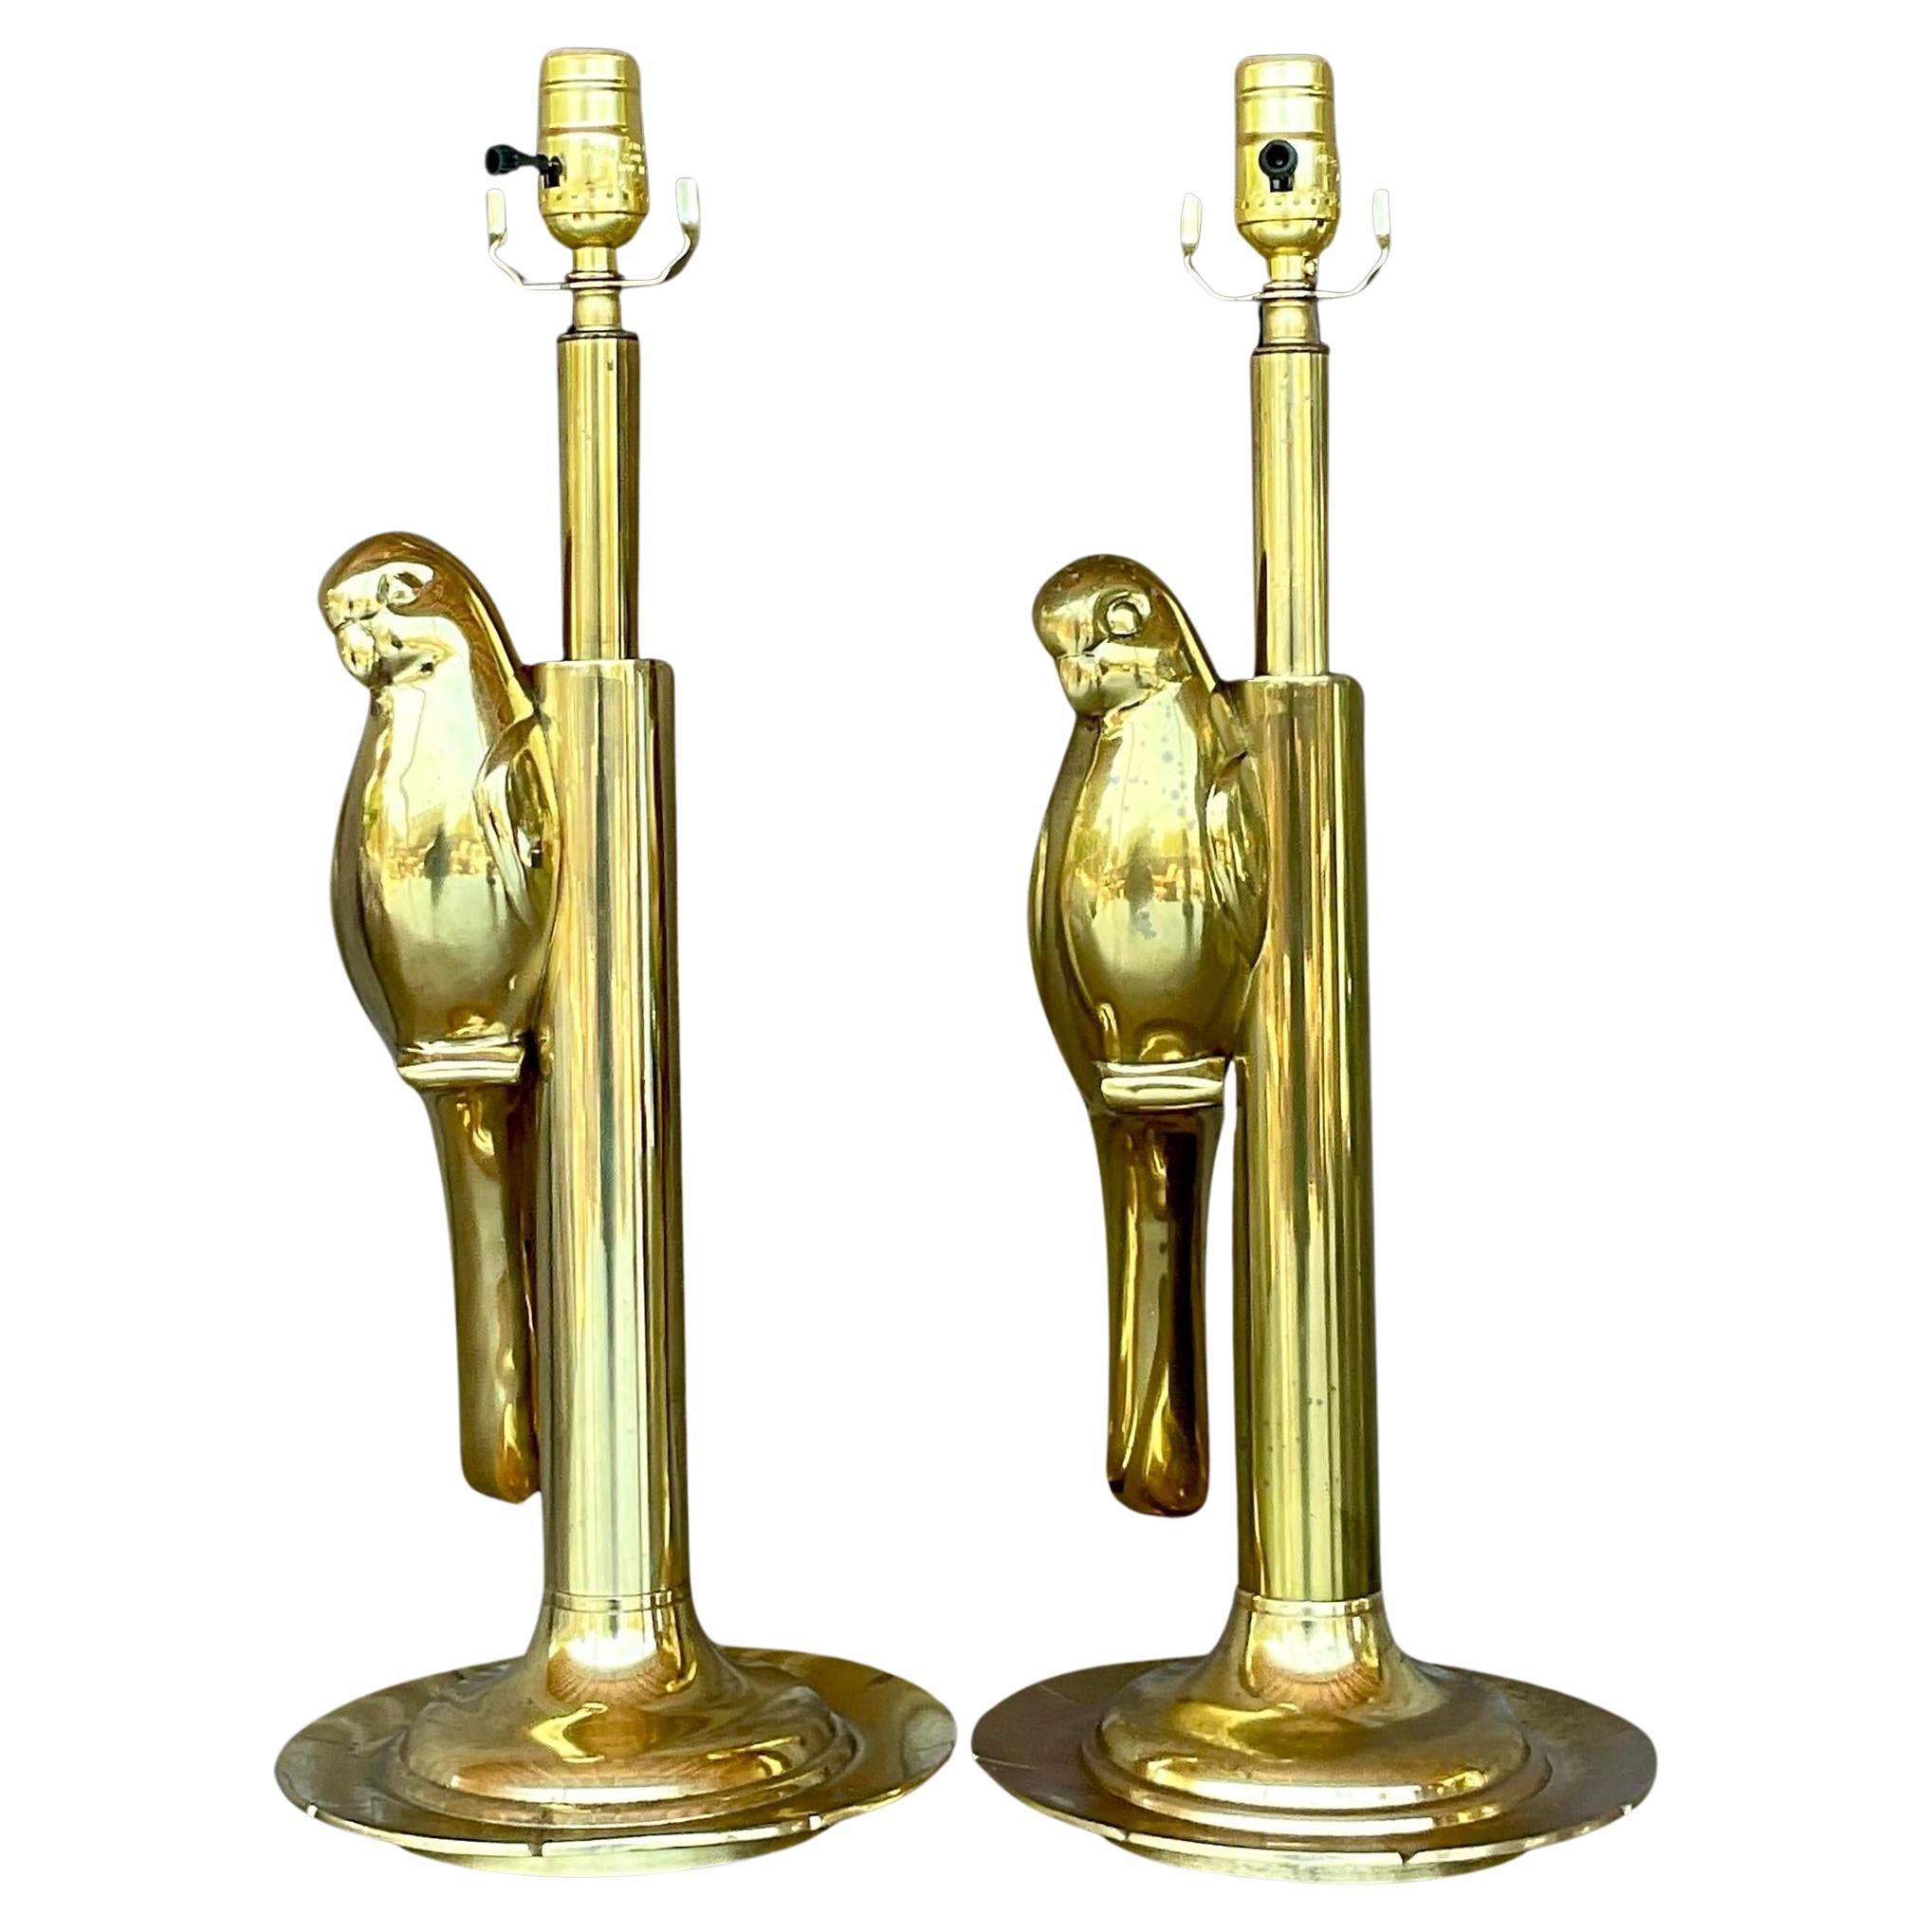 Vintage Boho Polished Brass Parrot Lamps - a Pair For Sale